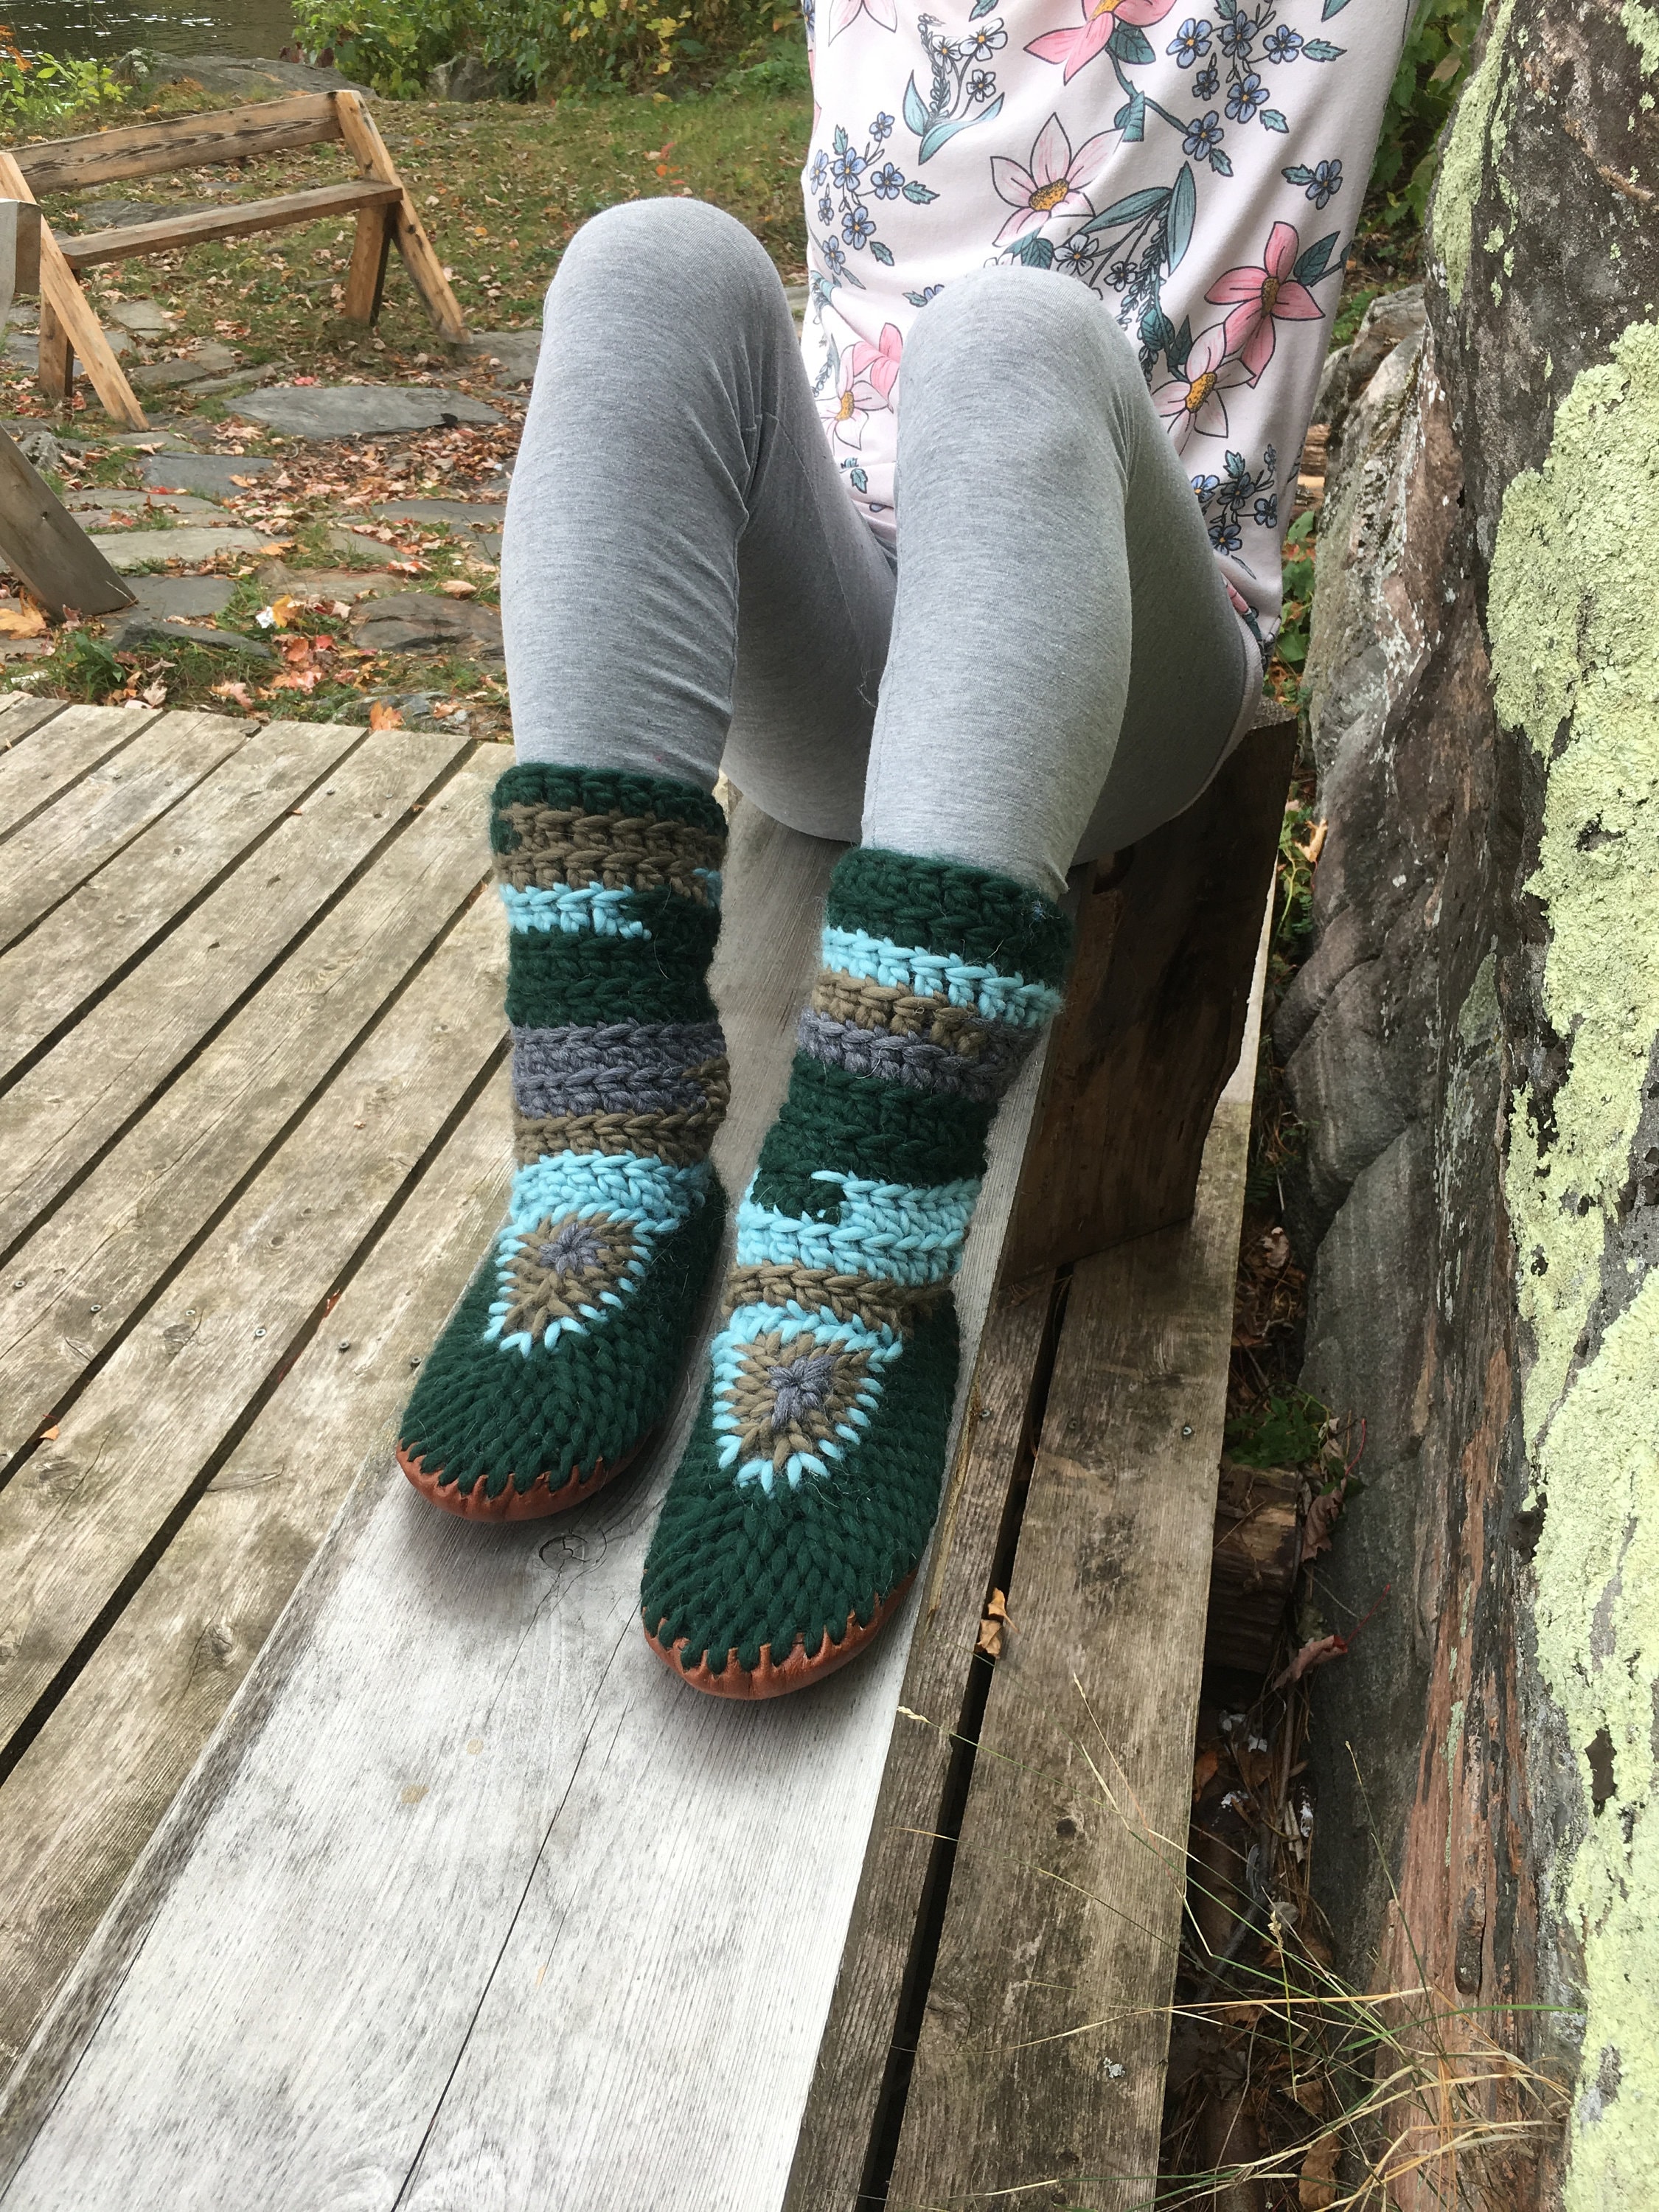 Merino Wool Sock Slippers With Red Stripe, Roots Slippers, Adult Padraigs,  Sock Monkey Slippers, Bootie Slippers With Sole, Slipper Boots 